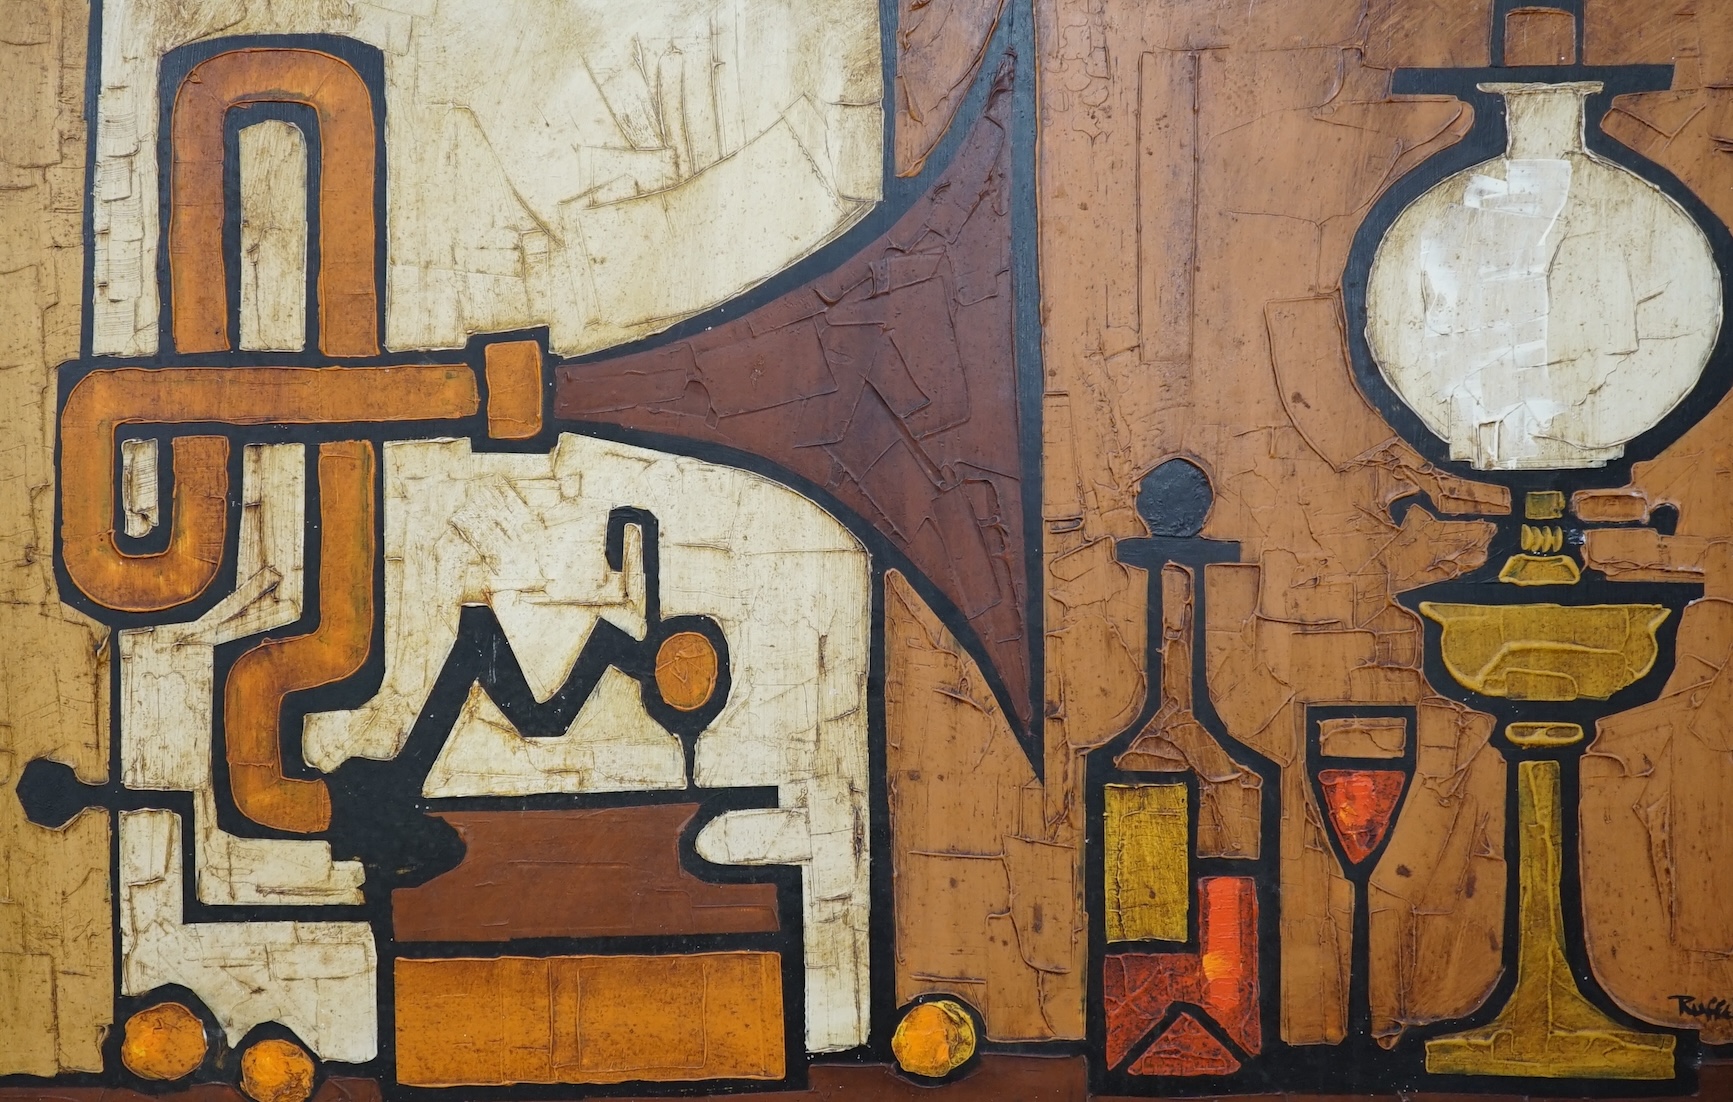 Colin Ruffell (b.1939), oil on board, Still life of a gramophone and vessels, signed, 59 x 92cm, unframed. Condition - fair, some minor chipping to the edges